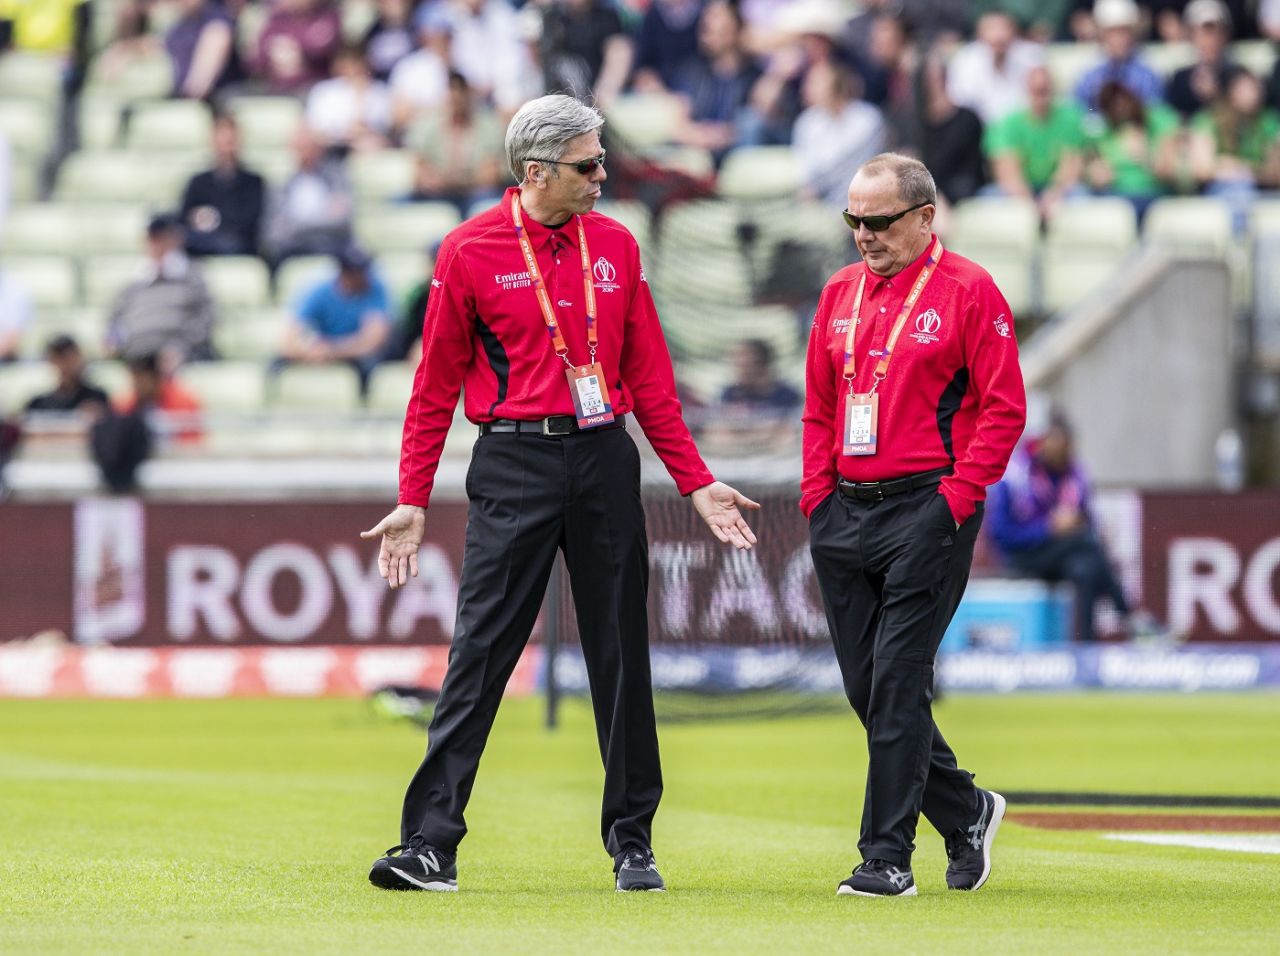 Umpires Nigel Llong and Ian Gould make a pitch inspection, South Africa v New Zealand, World Cup 2019, Birmingham, June 19, 2019